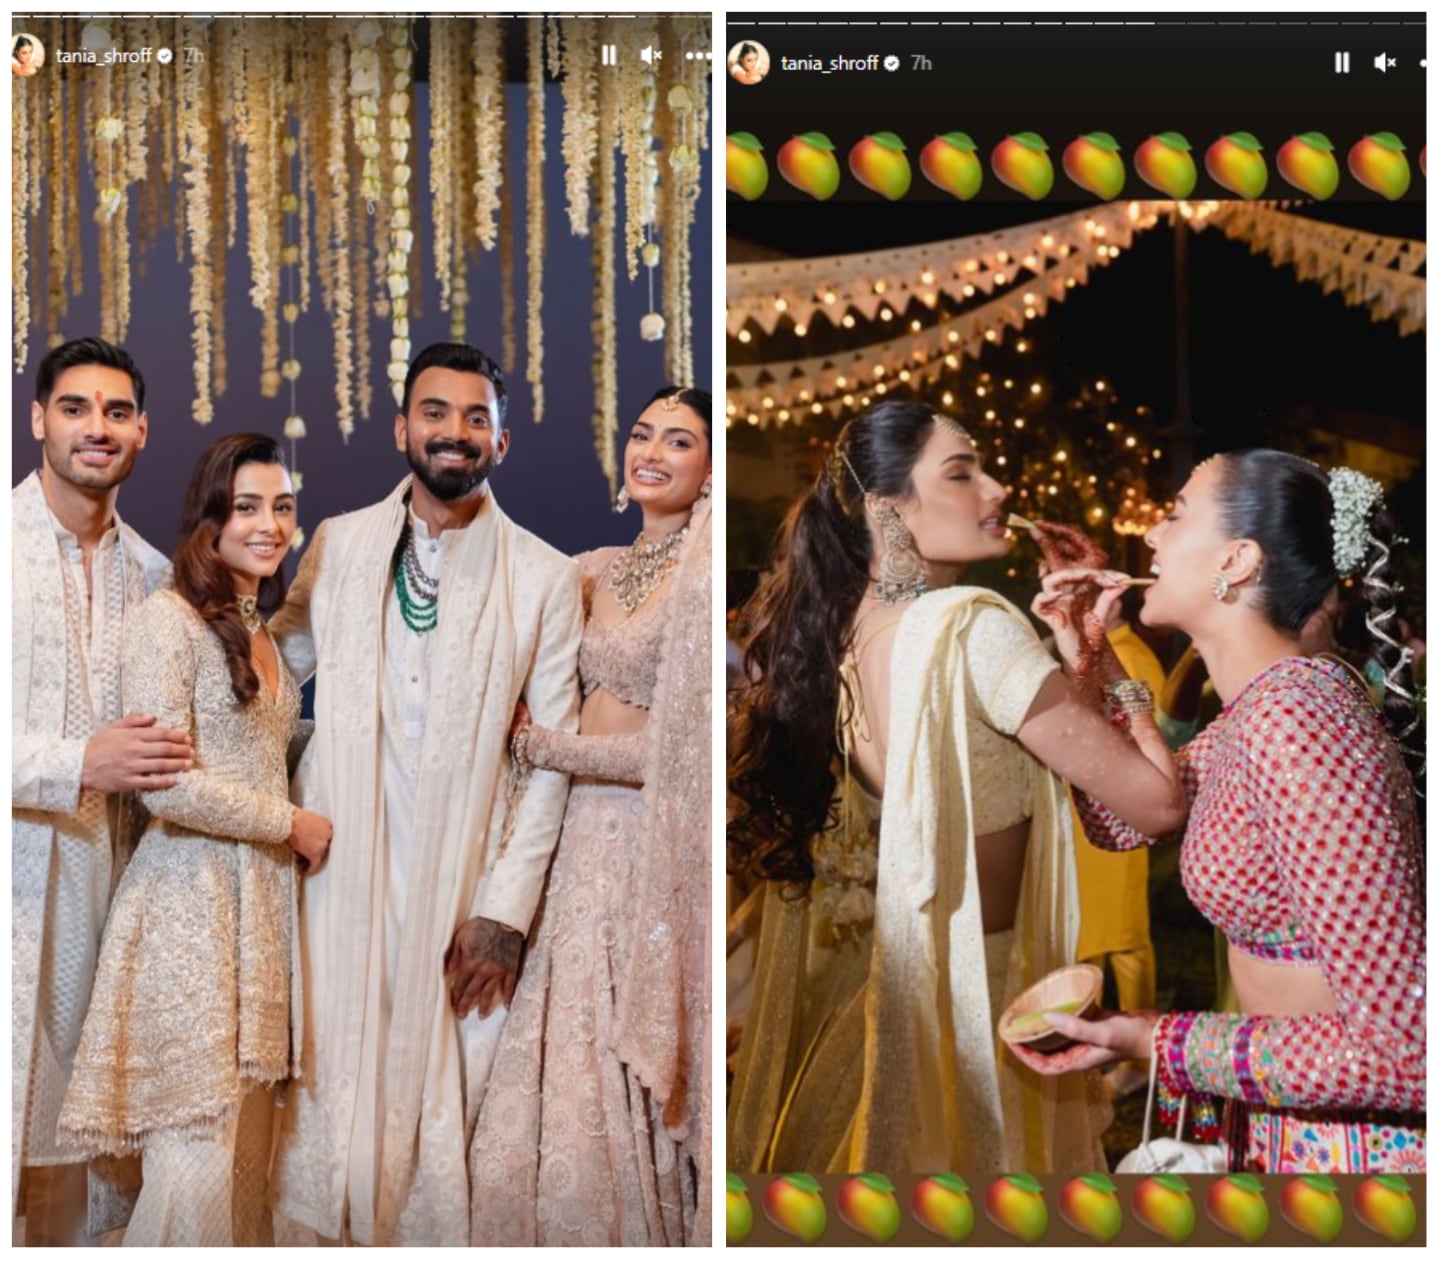 Athiya Shetty and KL Rahul pose with Ahan Shetty and his girlfriend Tania Shroff (left); Athiya with Tania at pre-wedding function (right).